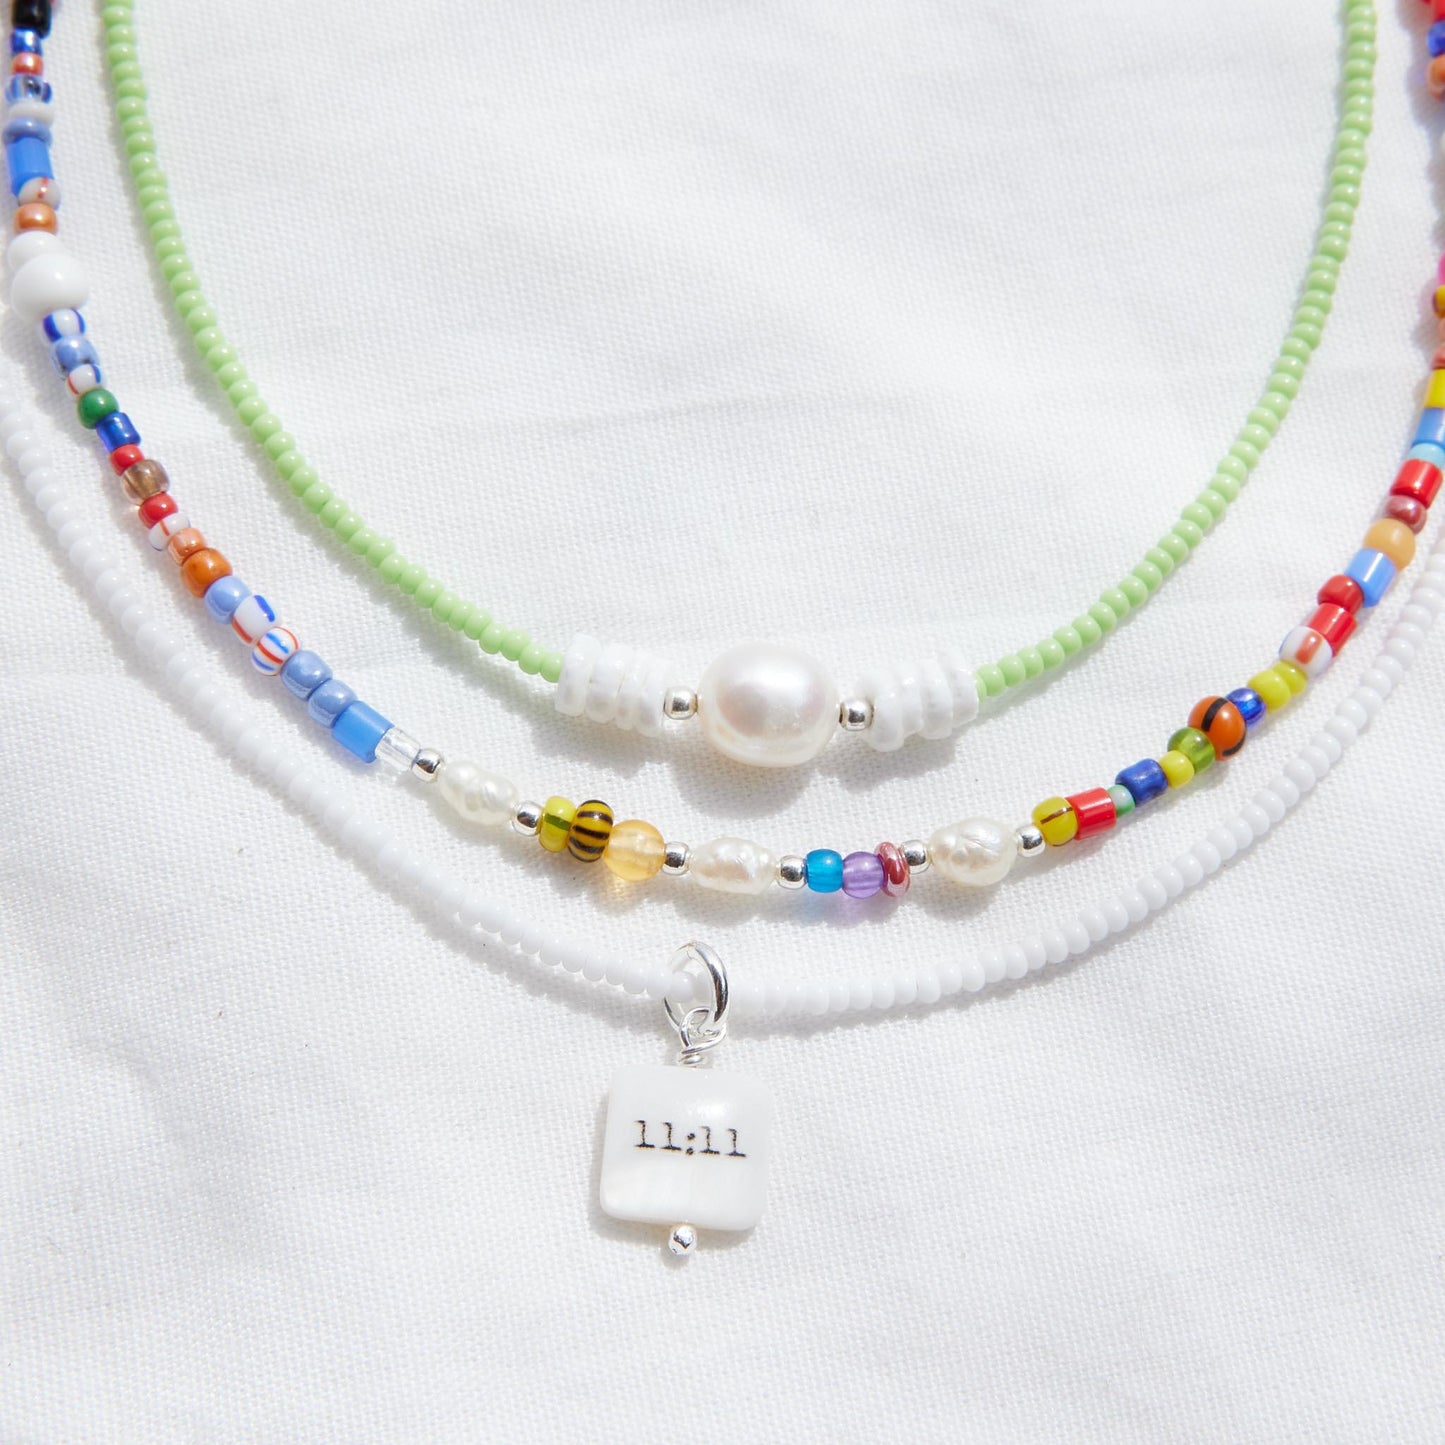 11:11 on White Glass beaded necklace